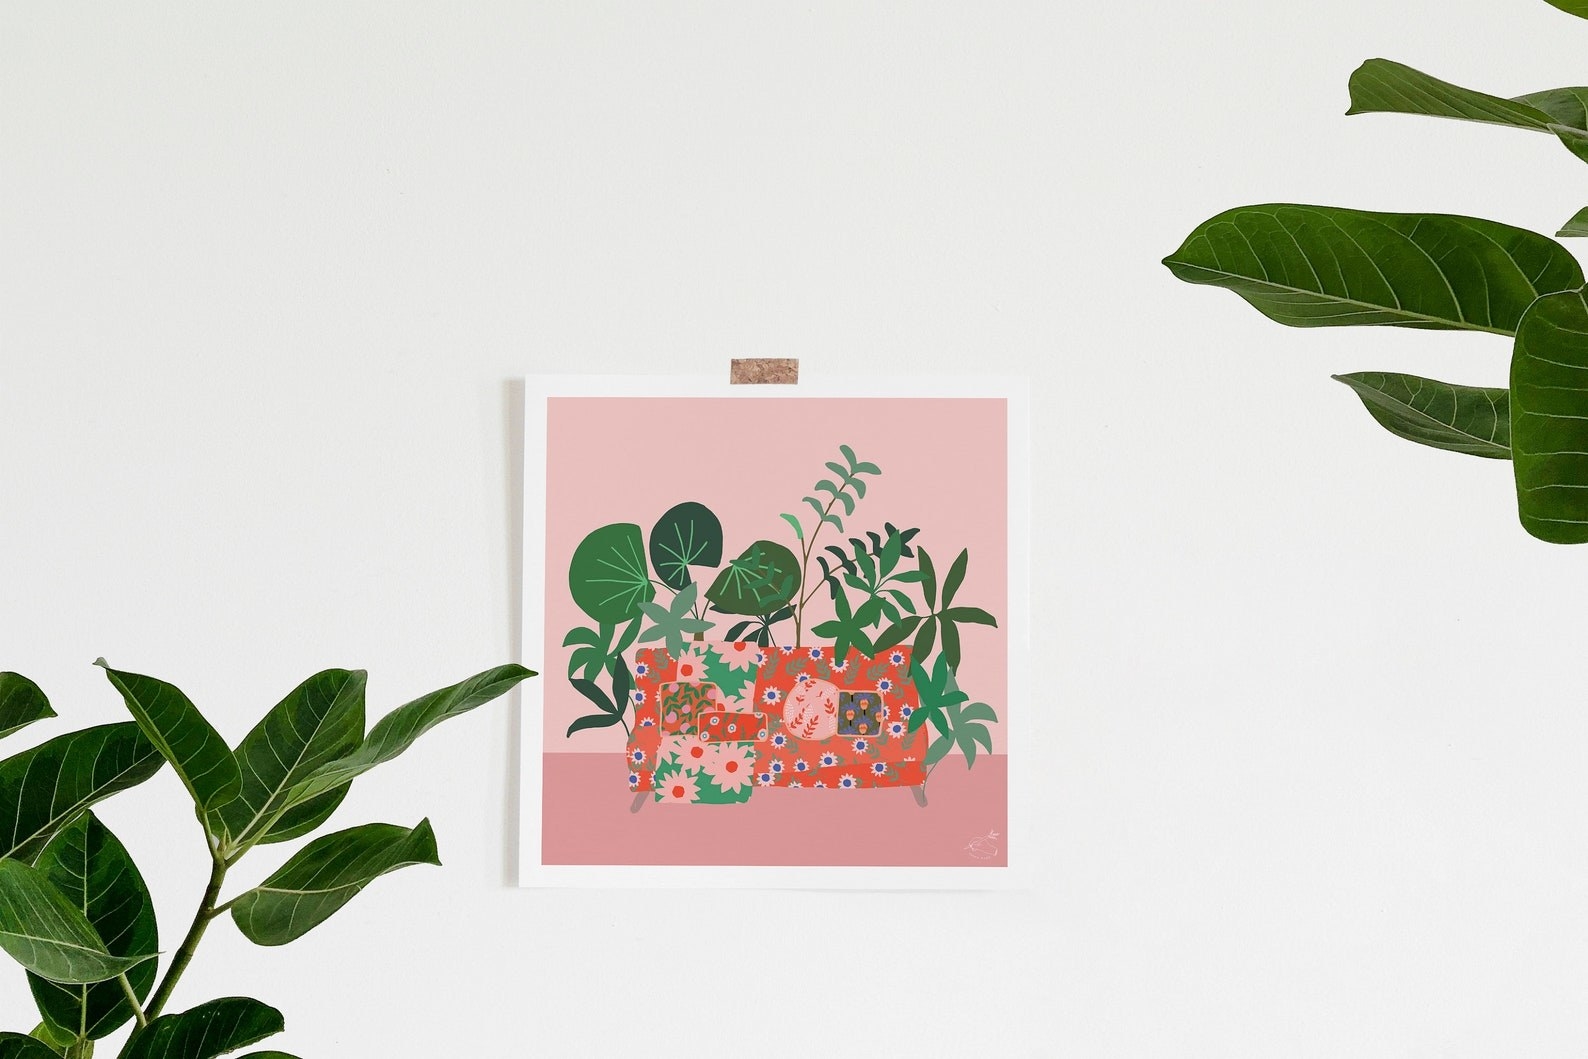 A pink, red, and green print of a plant still life